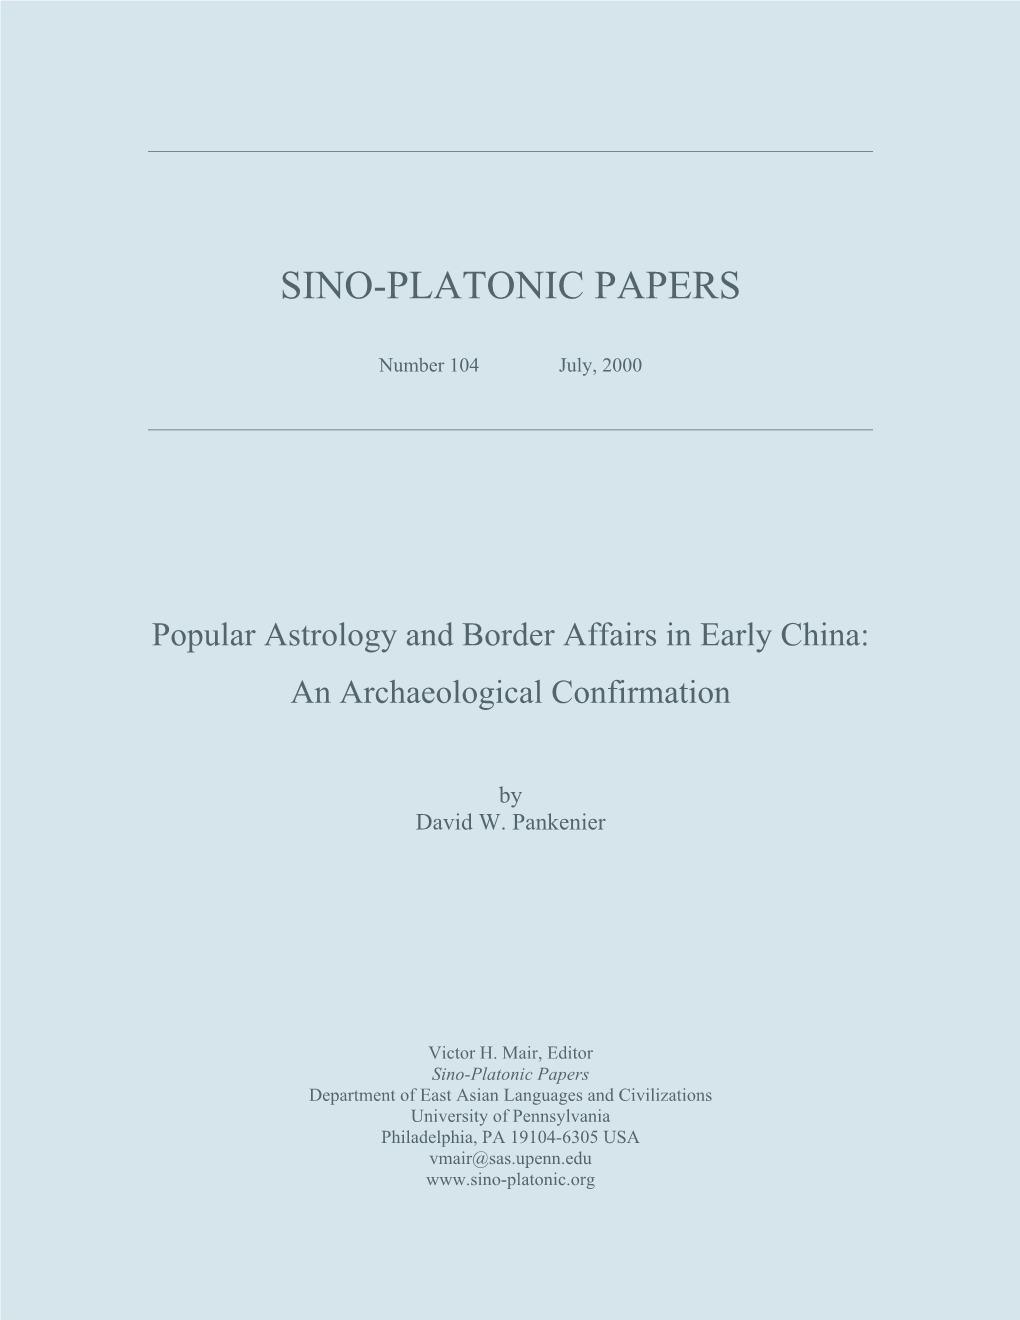 Popular Astrology and Border Affairs in Early China: an Archaeological Confirmation